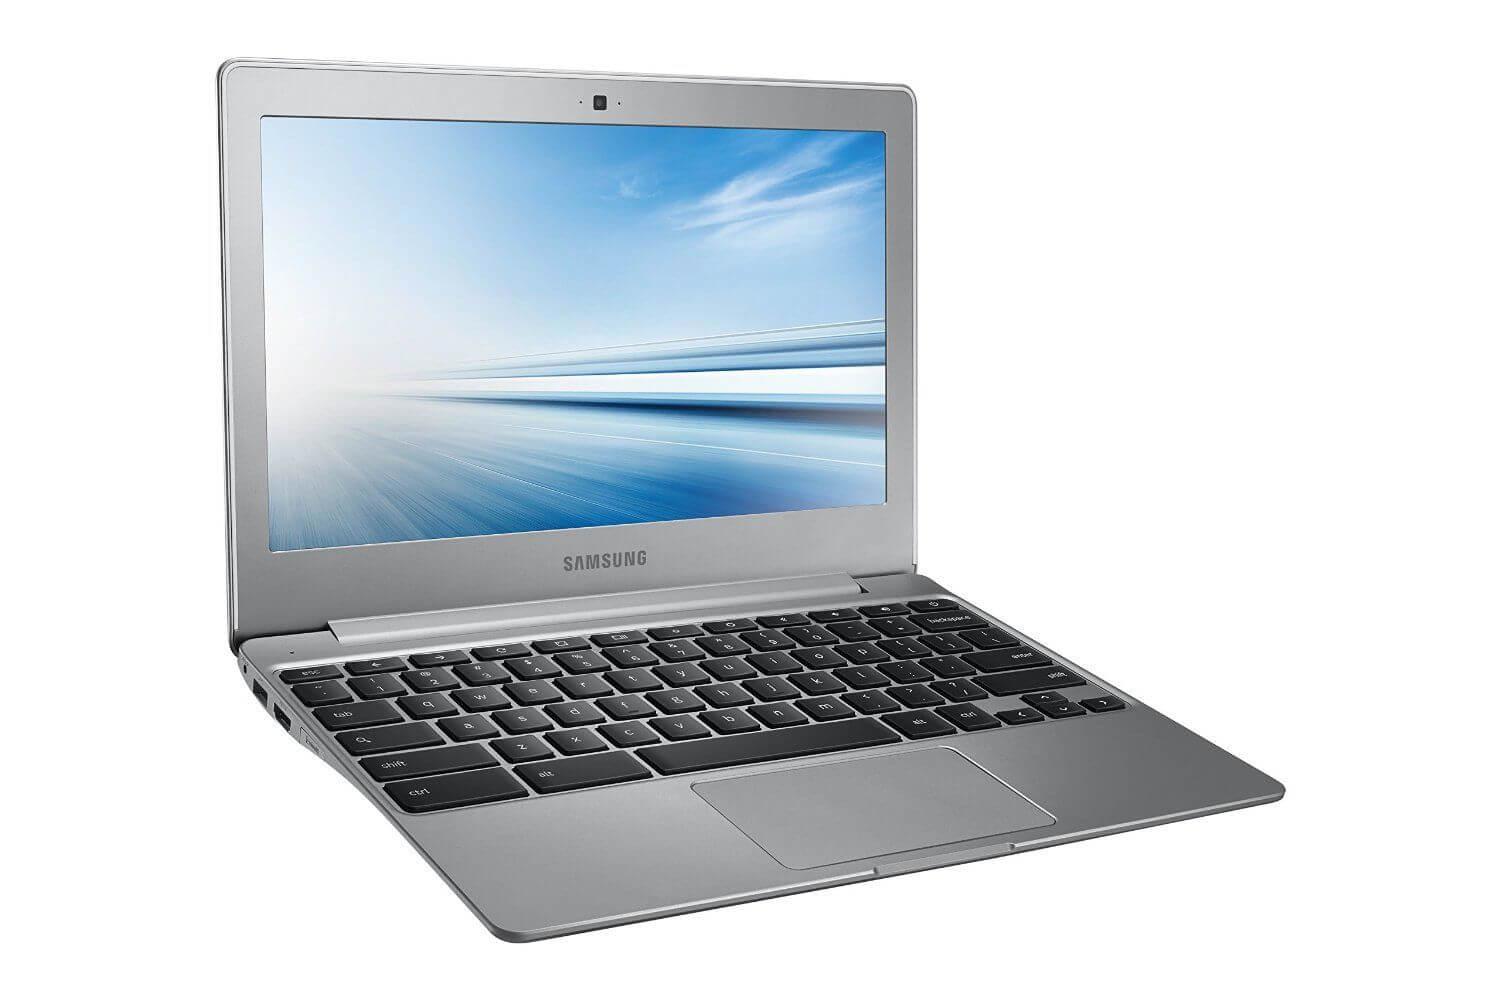 Samsung Chromebook 2 On Sale For $185 at Amazon – ClintonFitch.com